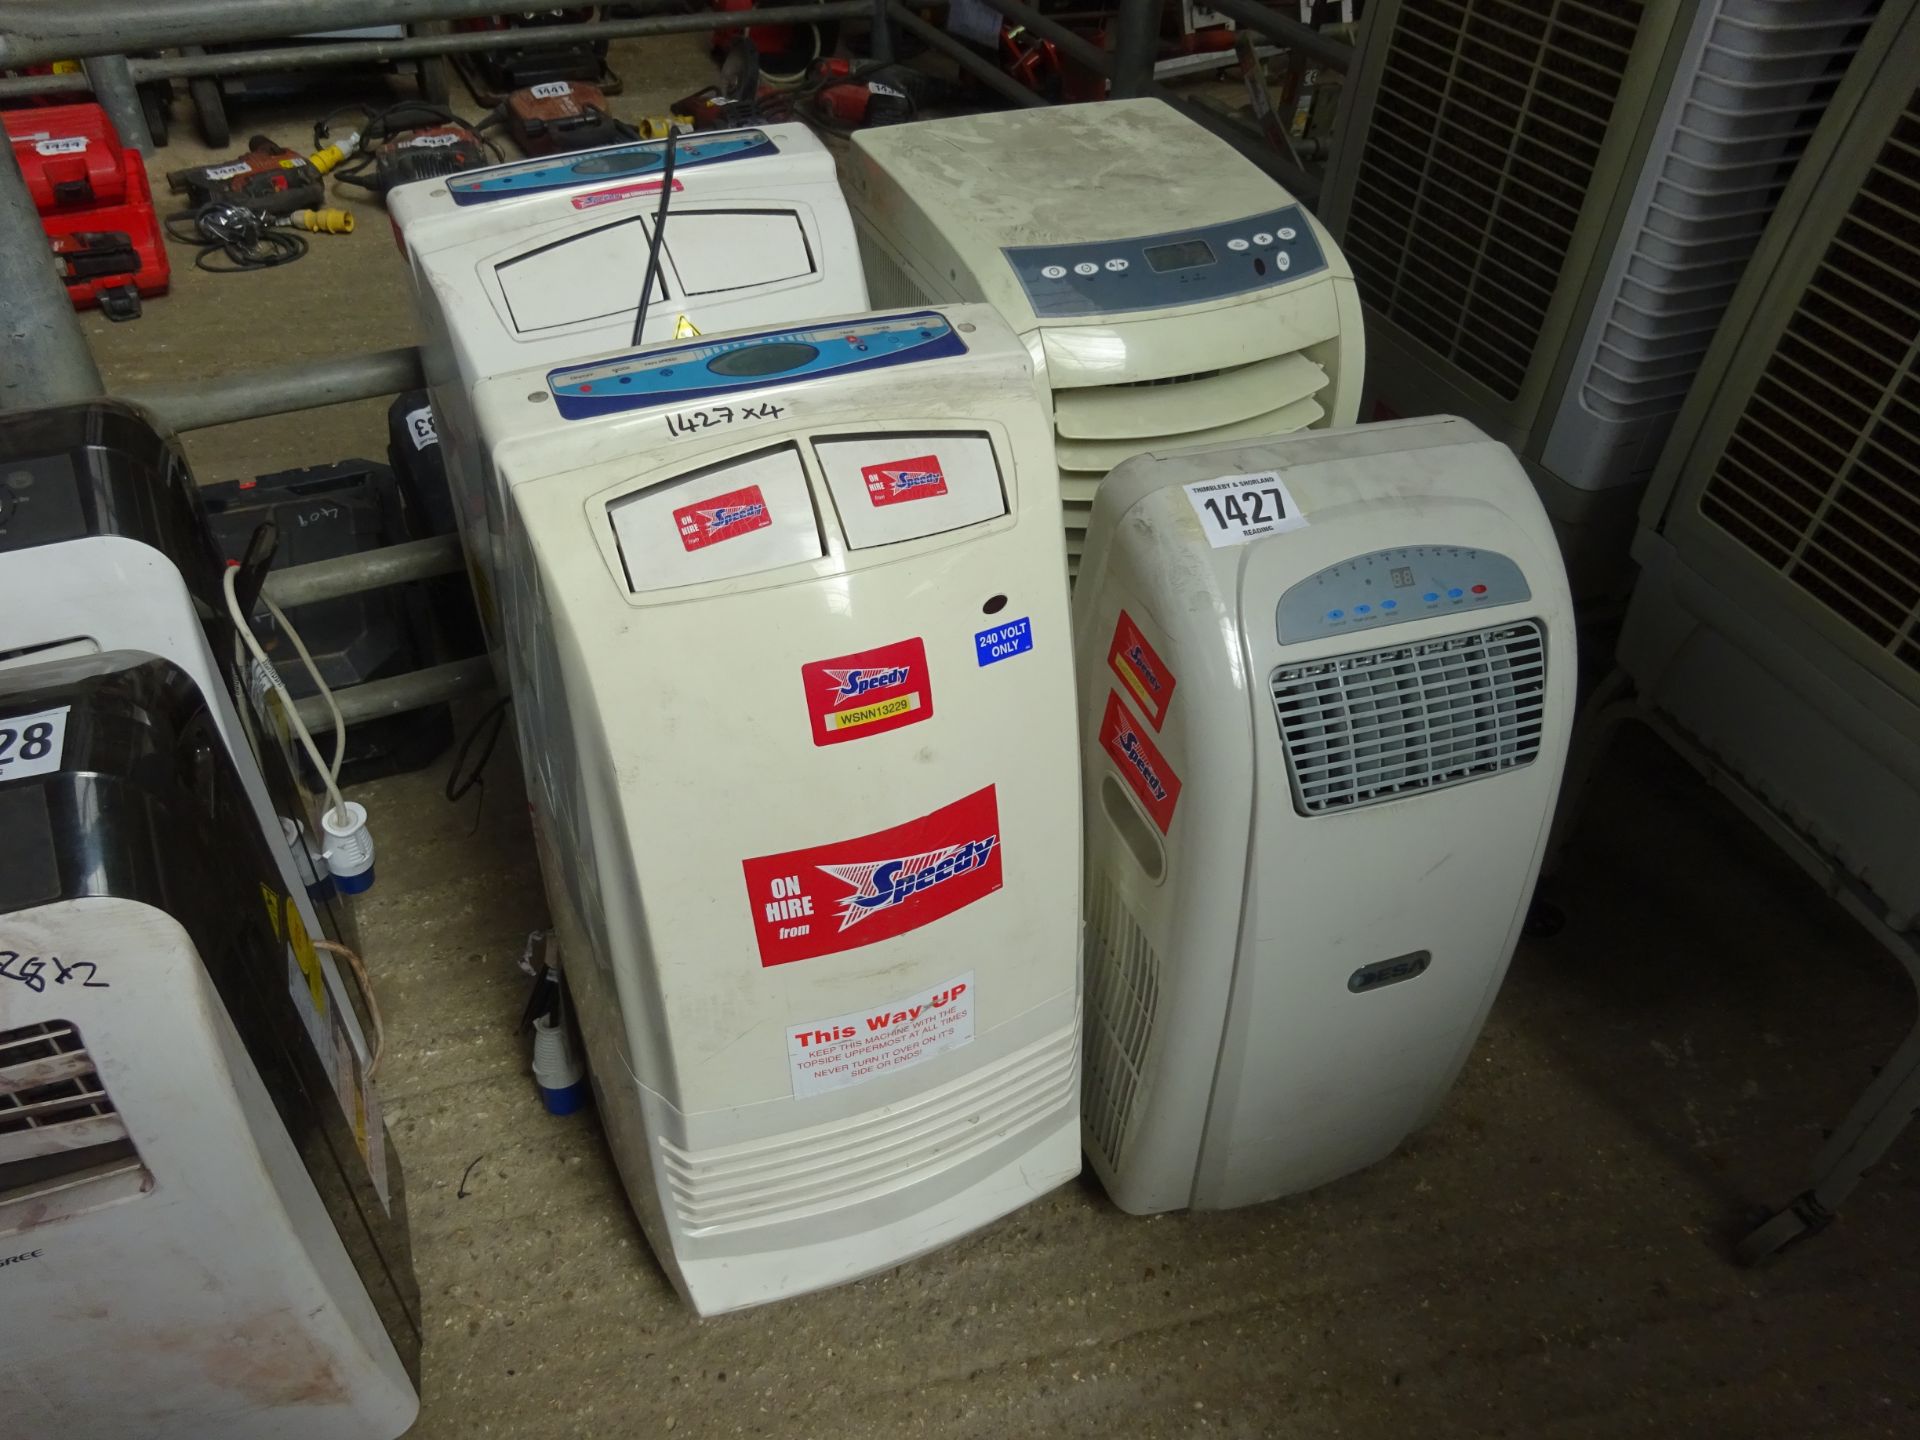 4 air conditioning units